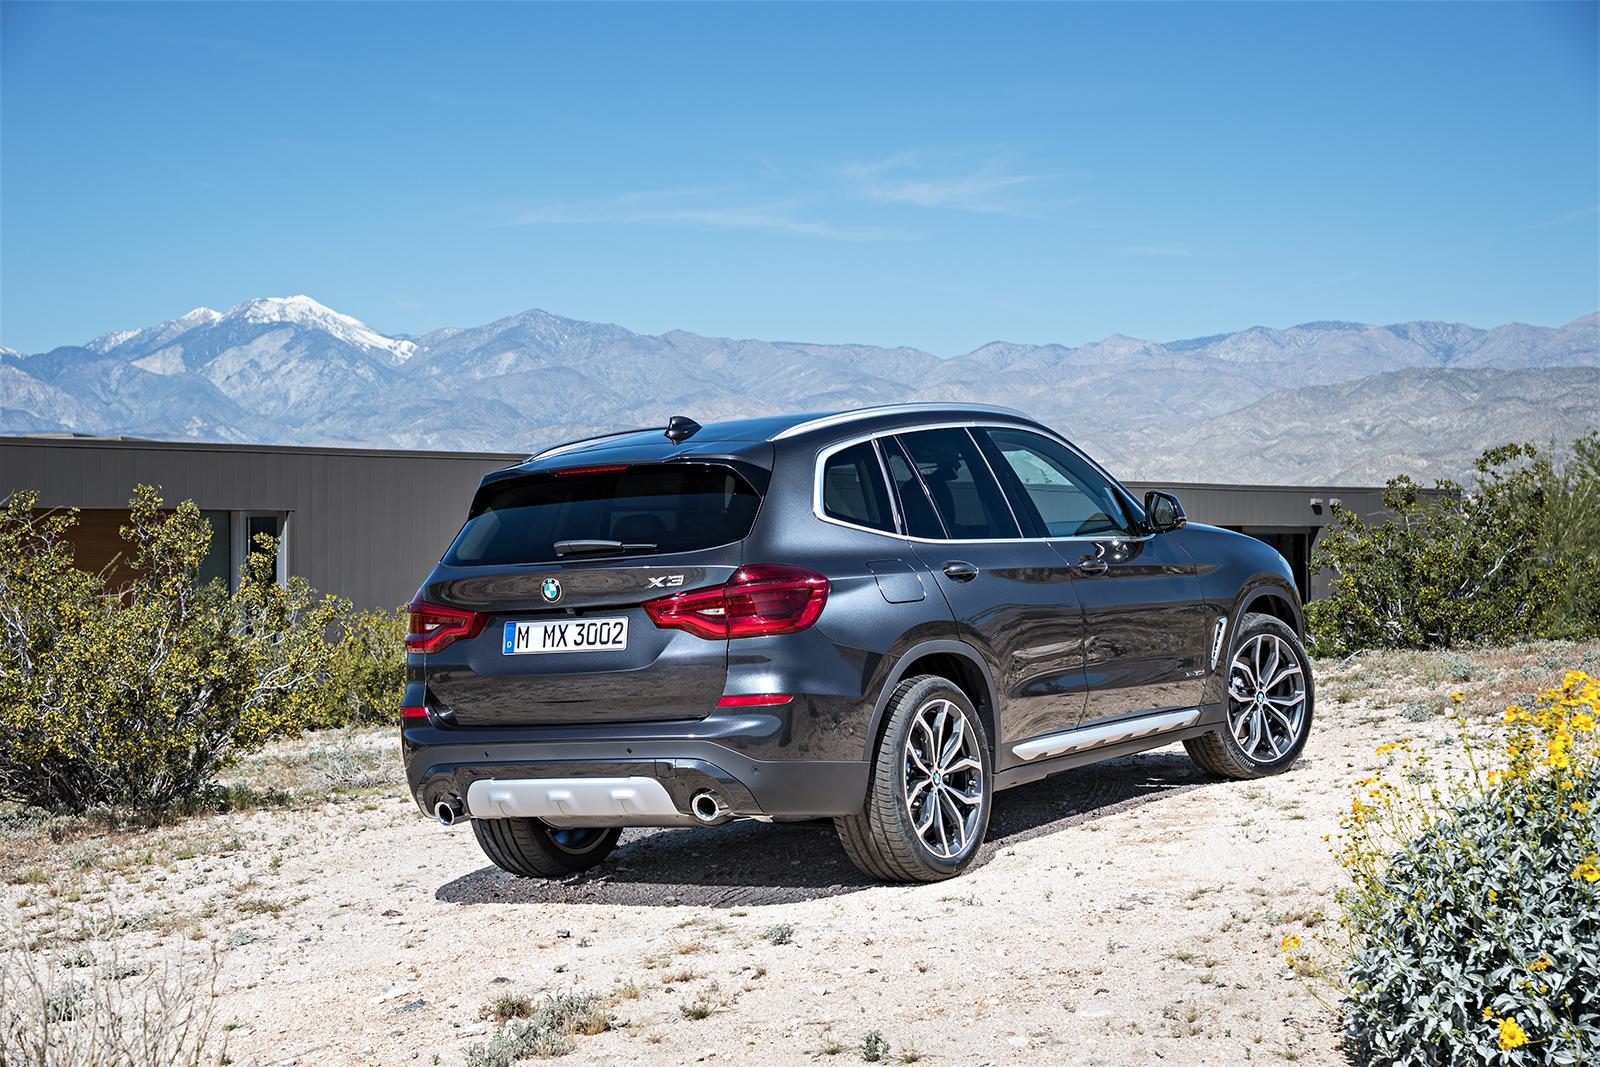 Is the Redesigned 2018 BMW X3 xDrive30i Still a Solid Choice Among